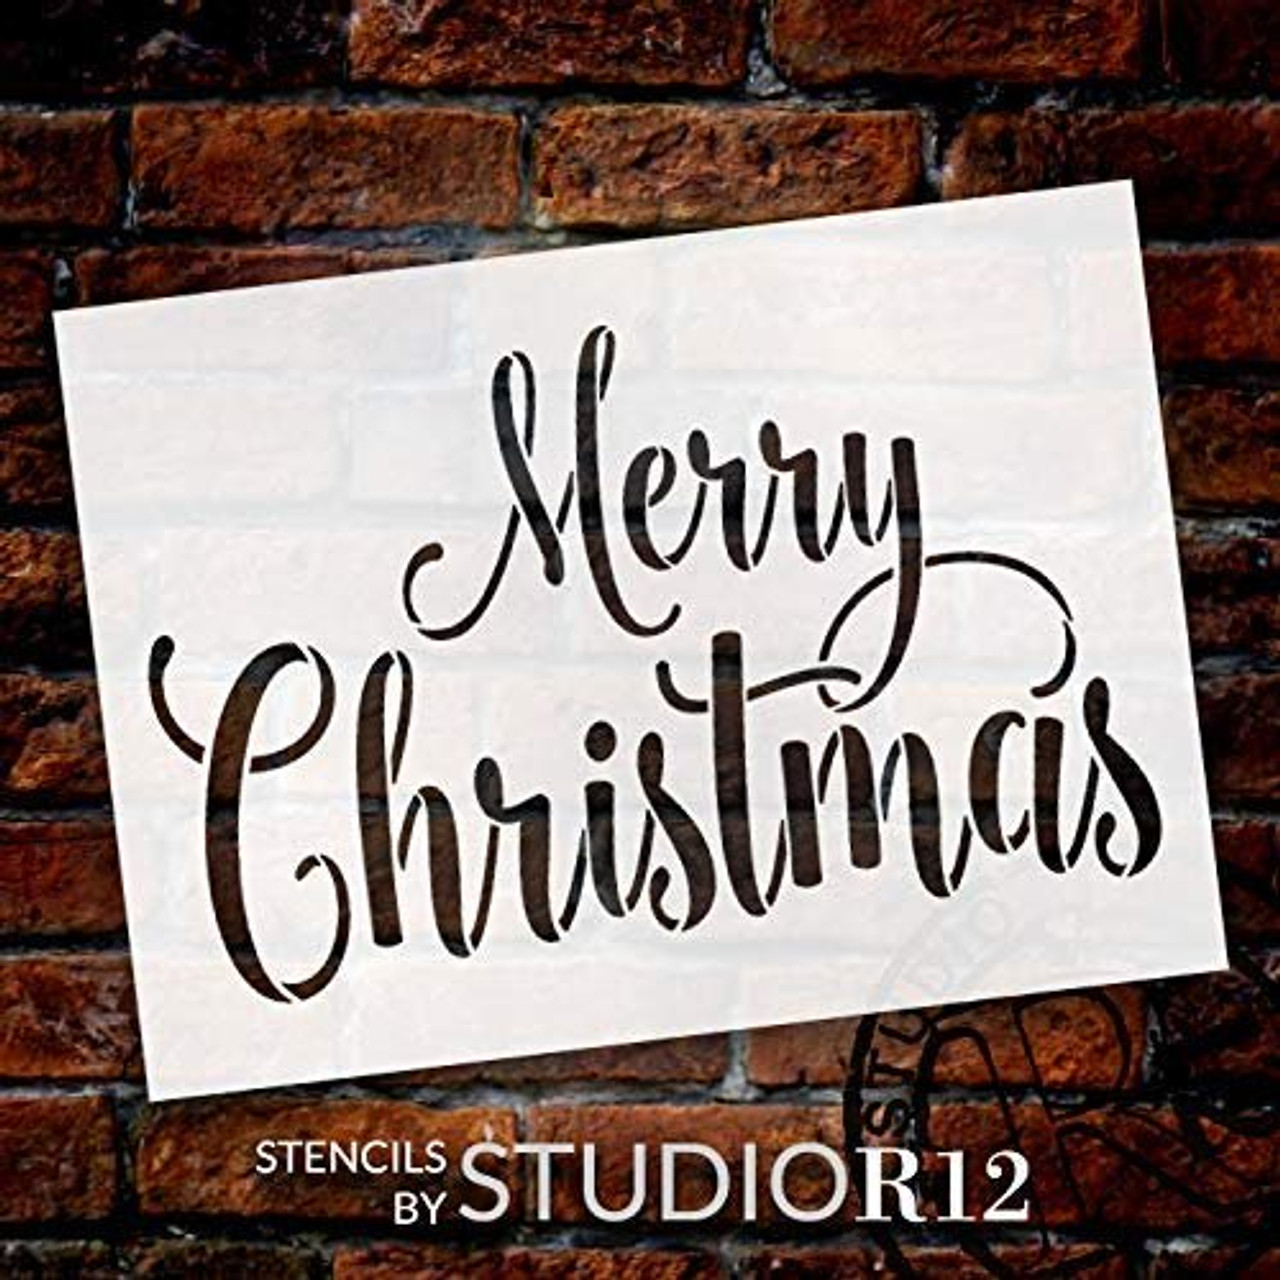 Merry Christmas Stencil by StudioR12 | Reusable Mylar Template Paint Wood Sign | Craft Seasonal Cursive Script Word Art Gift | DIY Holiday Home Decor - Living Room | Select Size